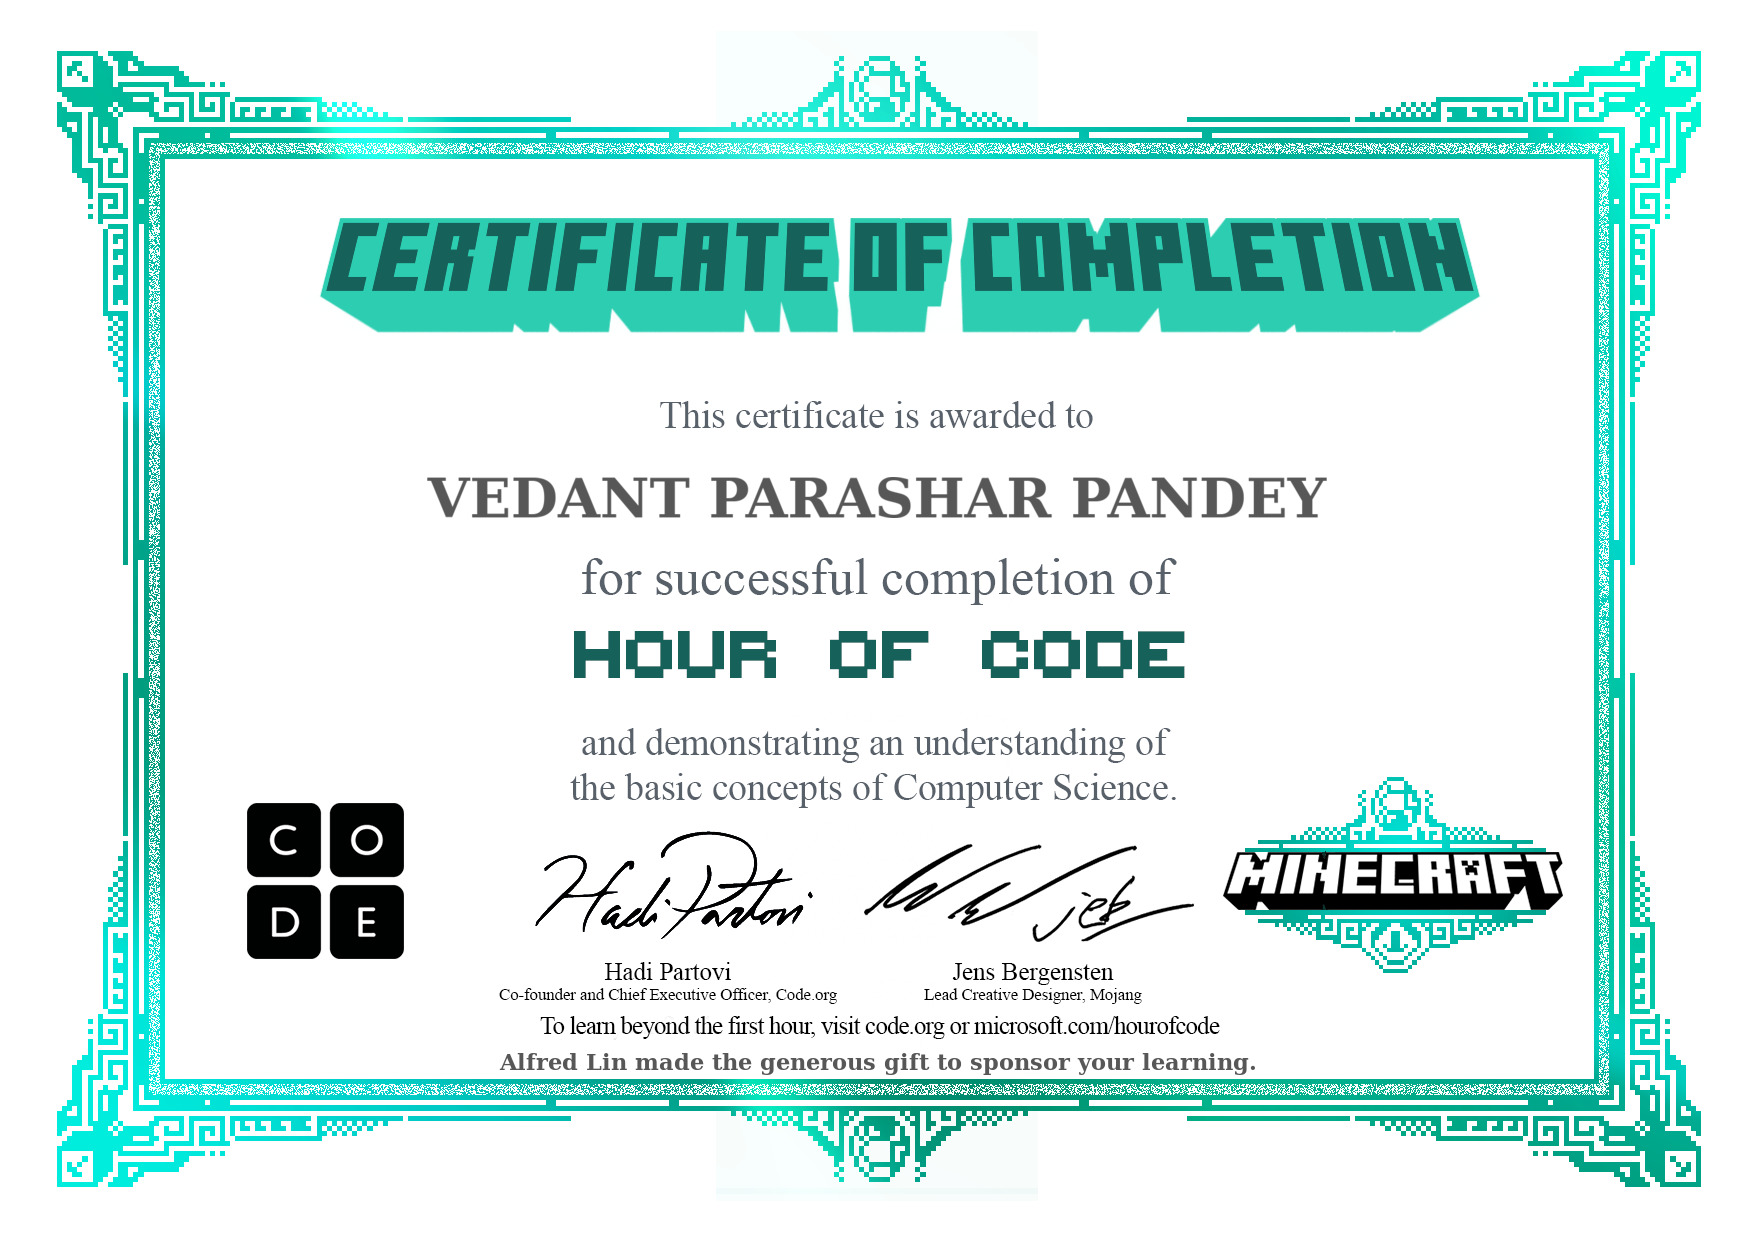 code.org certificate on programming to the youngest author vedant parashar